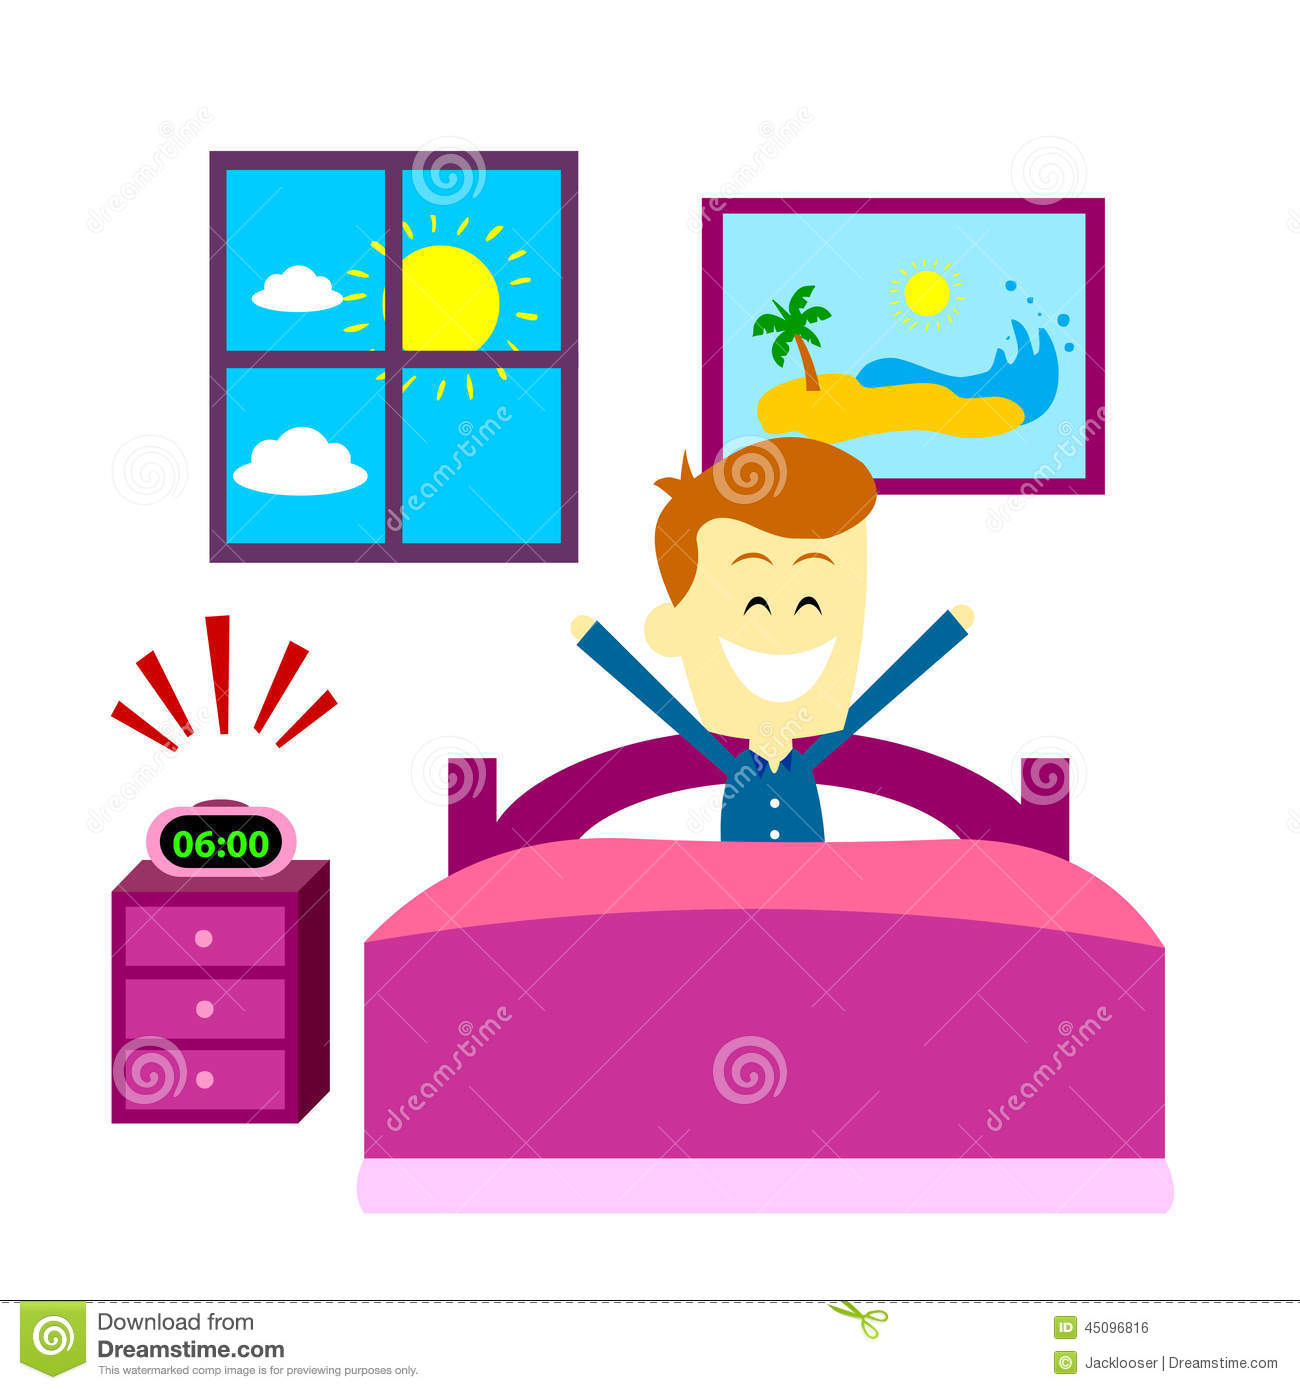 Man Waking Up In The Morning With Happy Thought  Good Mood  In Flat